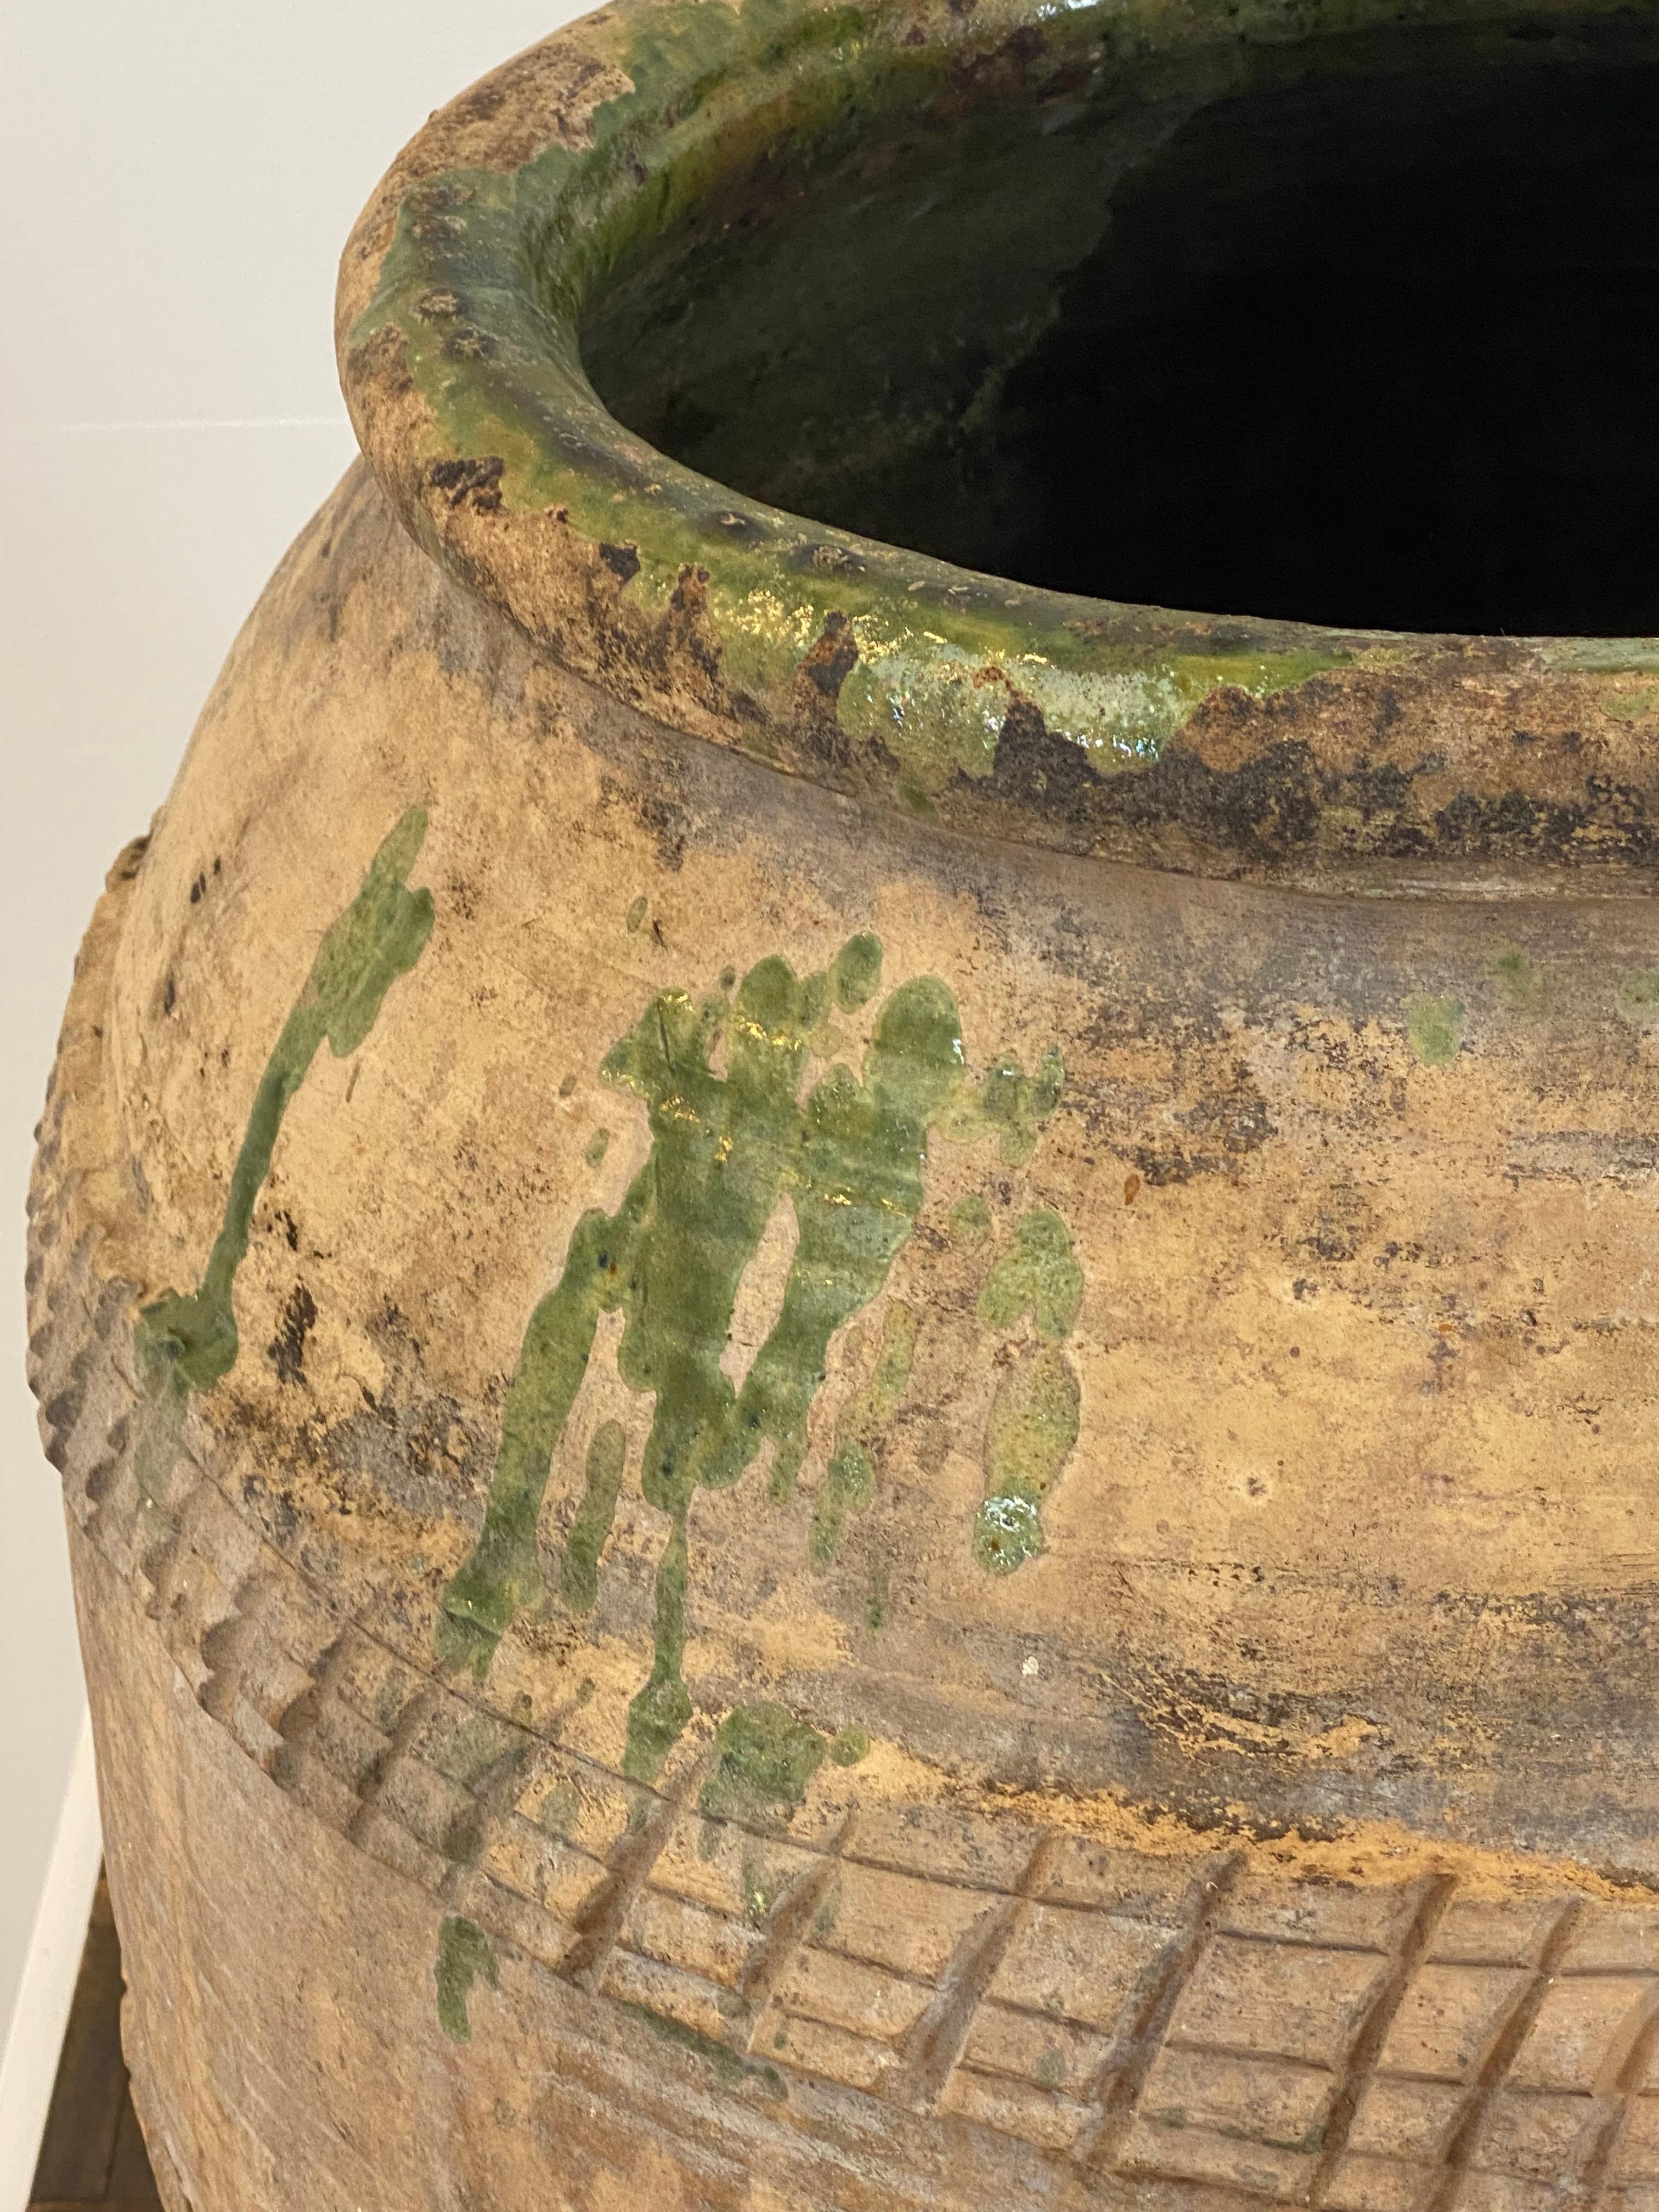 A very exceptional Spanish Terracotta Jar,Urn from the town Girona,
great old patina and traces of a Green Color,
3 special lines of carved decorations,
beautiful decorative object , can be used for several purposes.